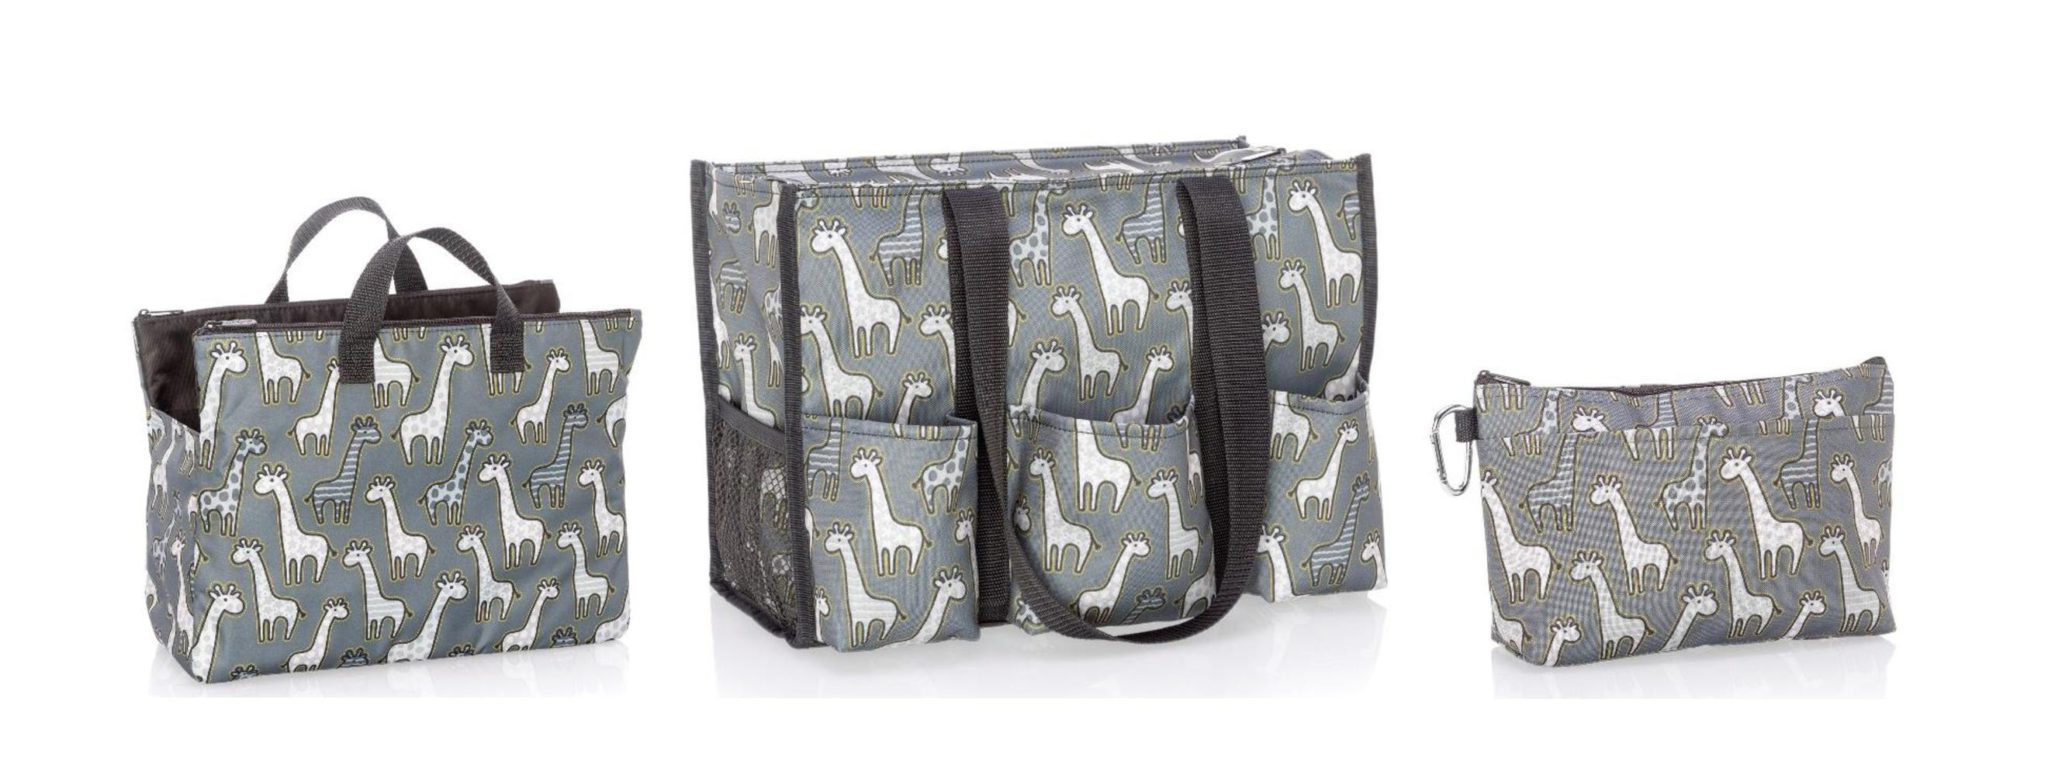 Thirty-One Gifts - Check out our new Zip-Top Organizing Utility